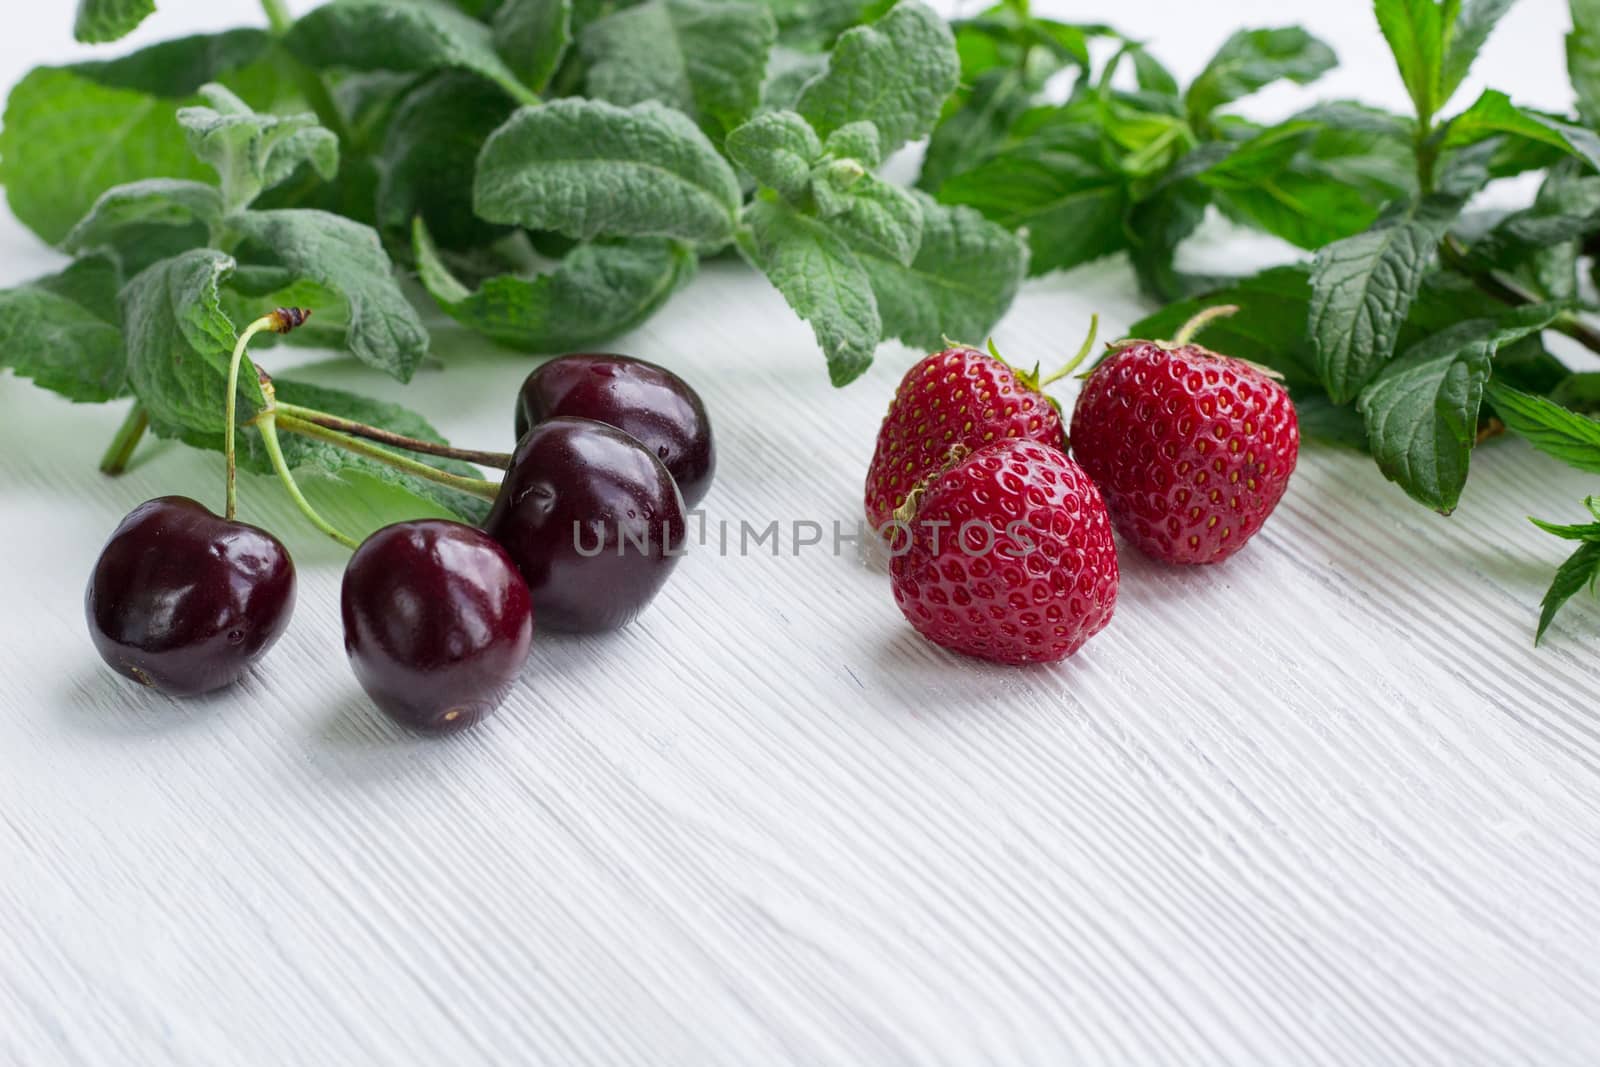 Vinous cherries, red strawberries with green herbal mix of fresh mint and melissa herbs on white wooden background